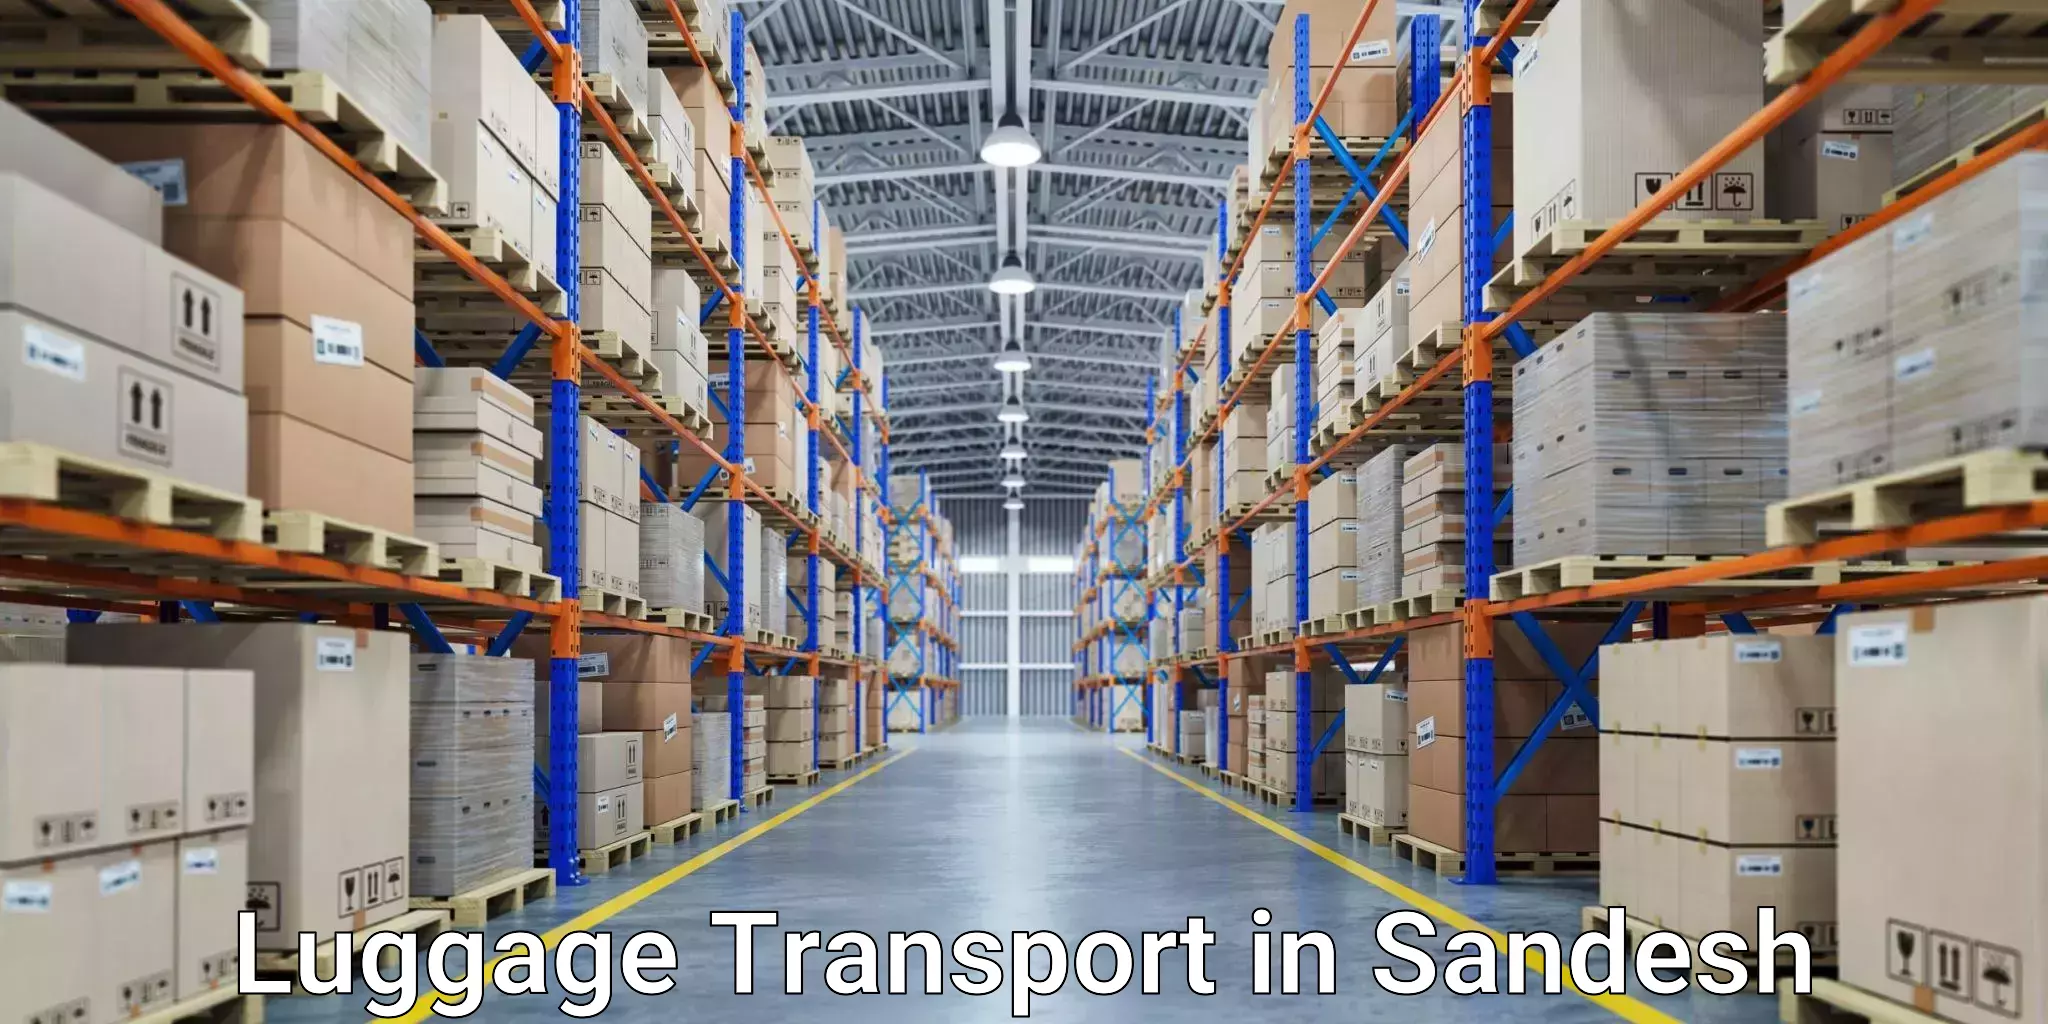 Domestic luggage transport in Sandesh